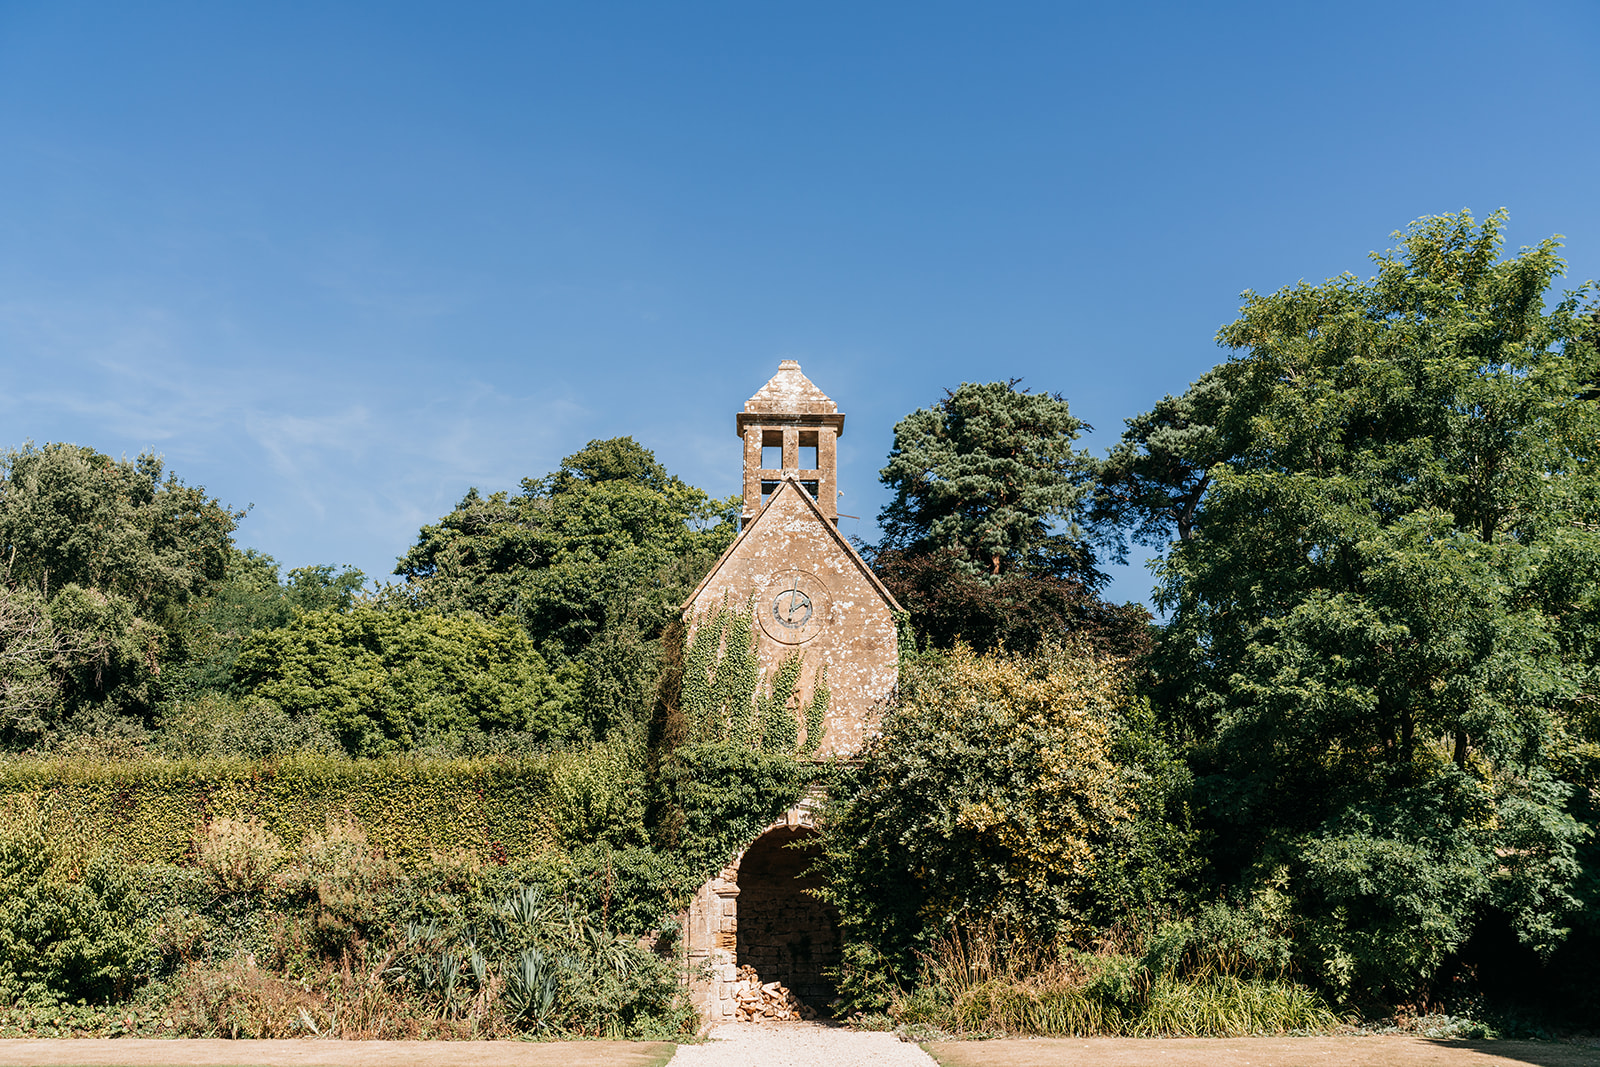 the clock tower at Brympton house surrounded by greenery